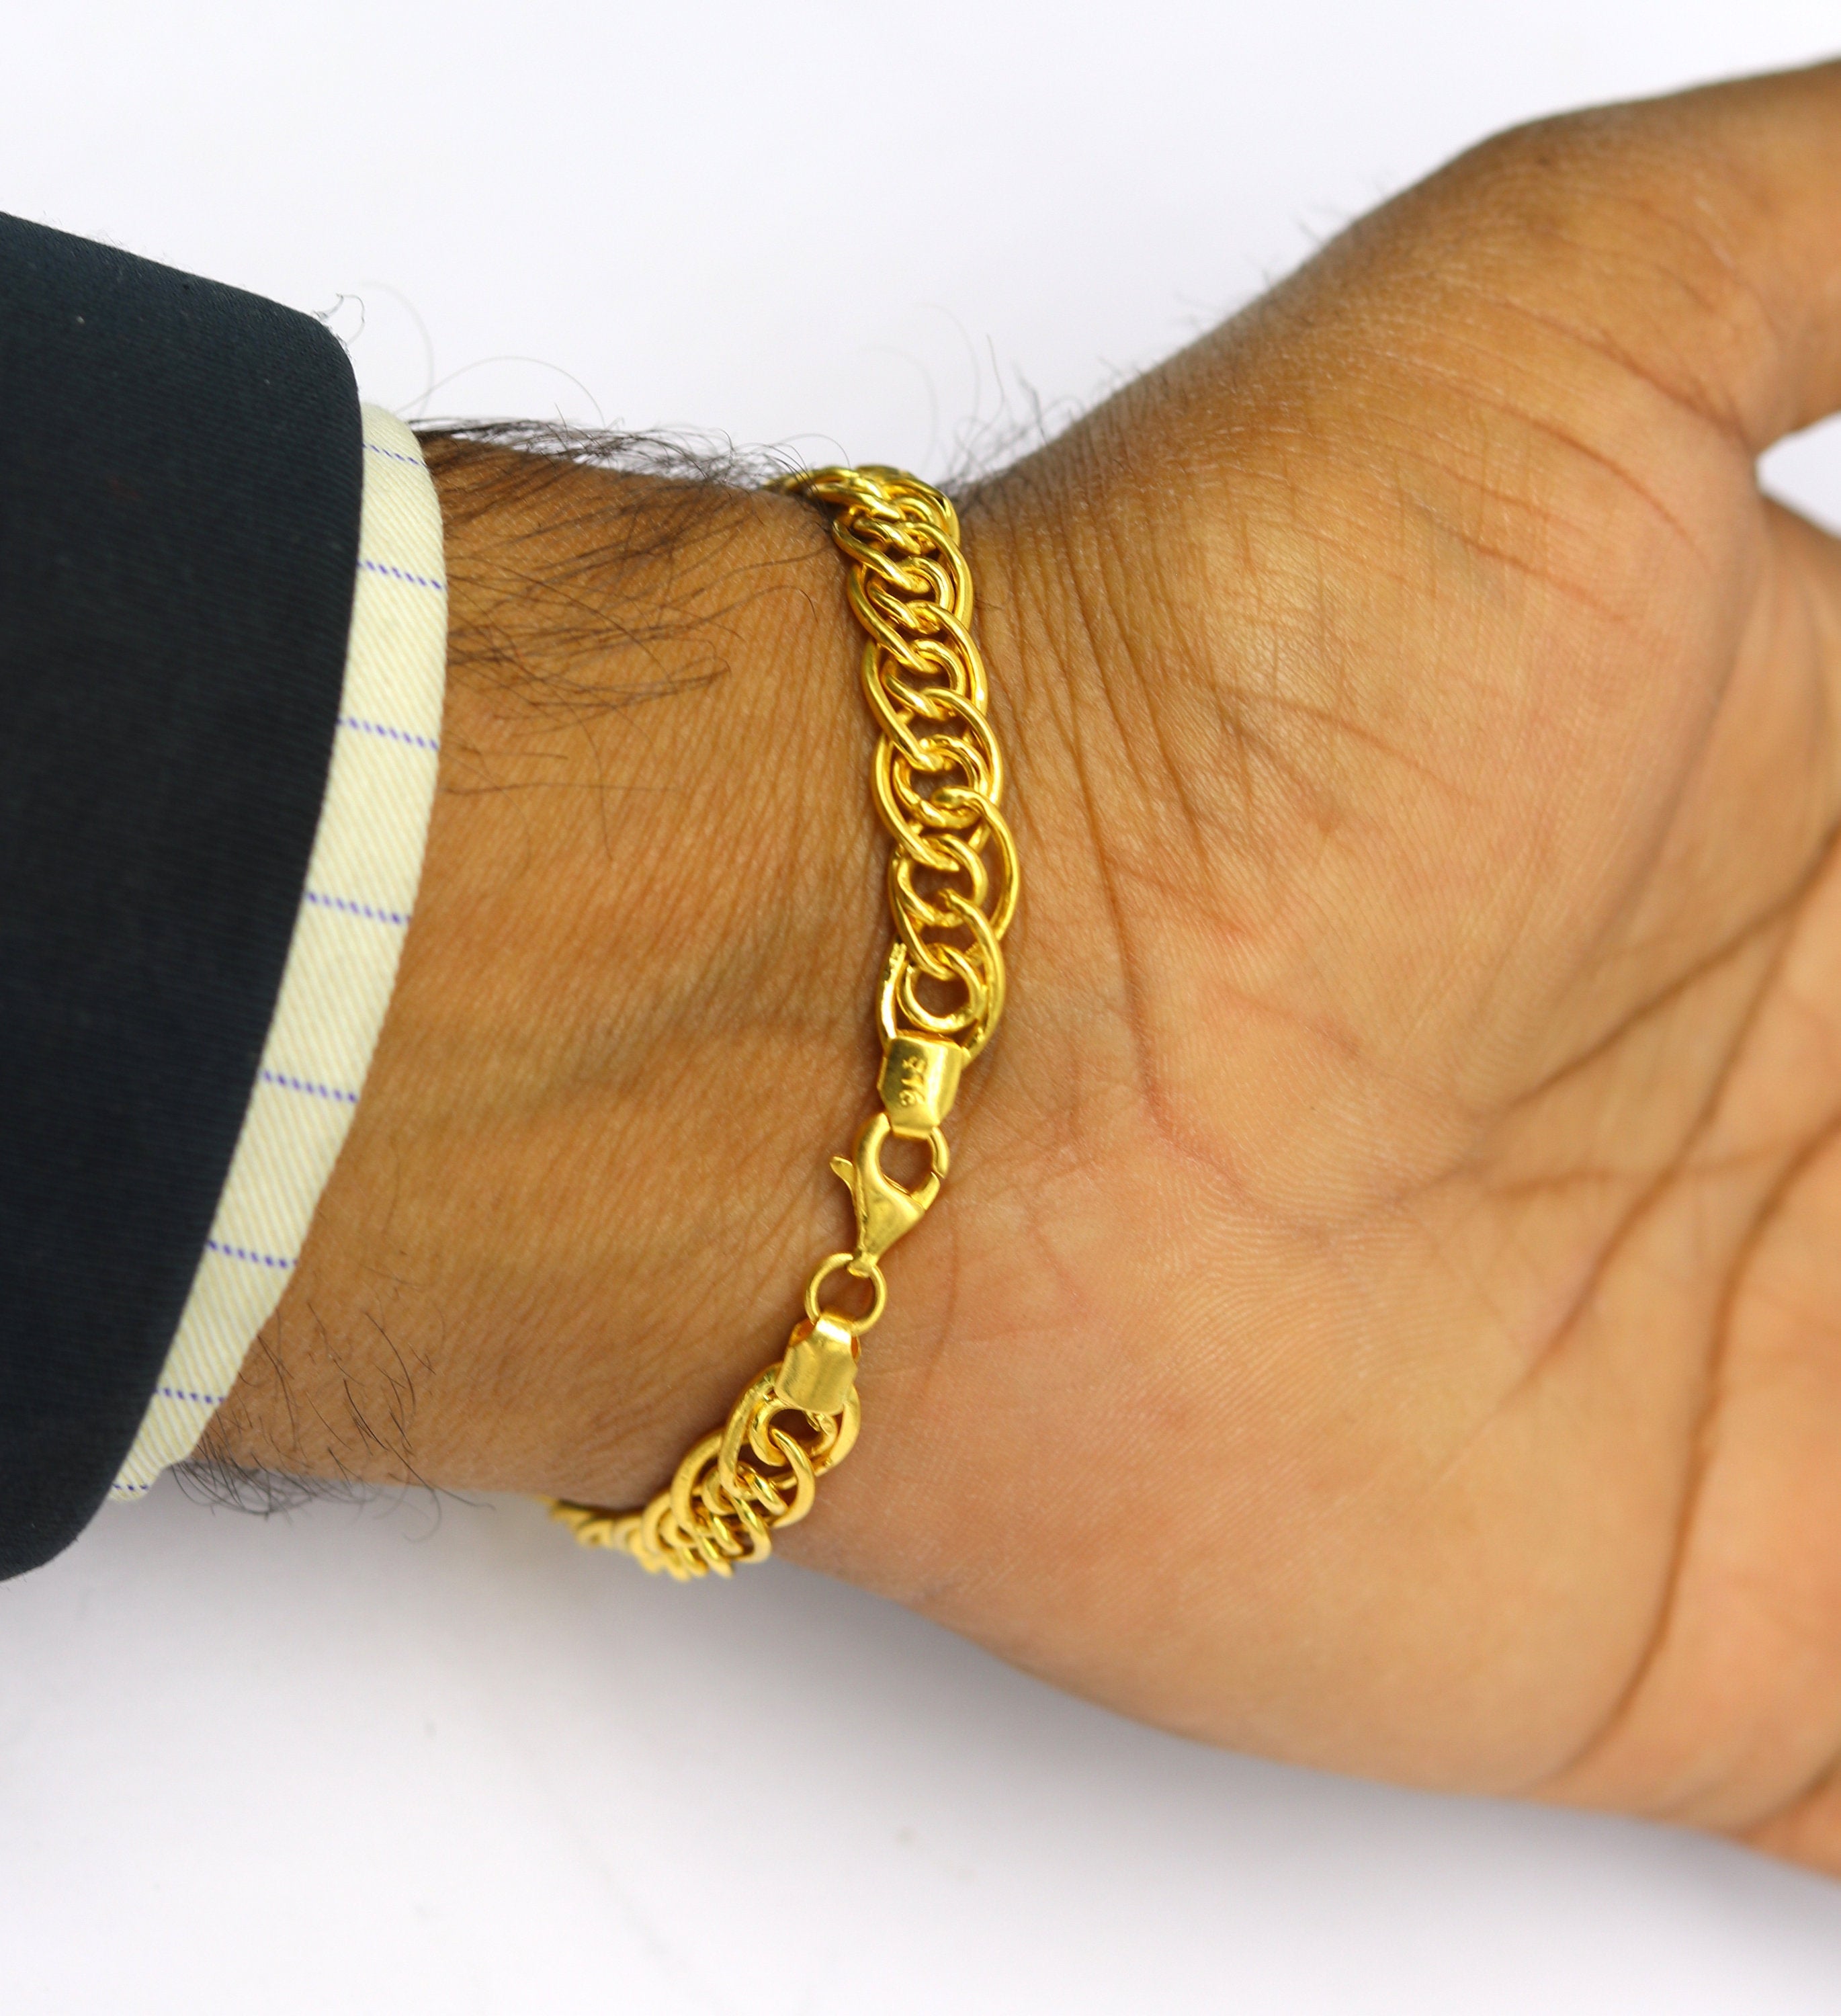 Exclusive trendy design handmade 22kt yellow gold All size Baht chain  bracelet best men's wedding gifting jewelry from india gbr76 | TRIBAL  ORNAMENTS